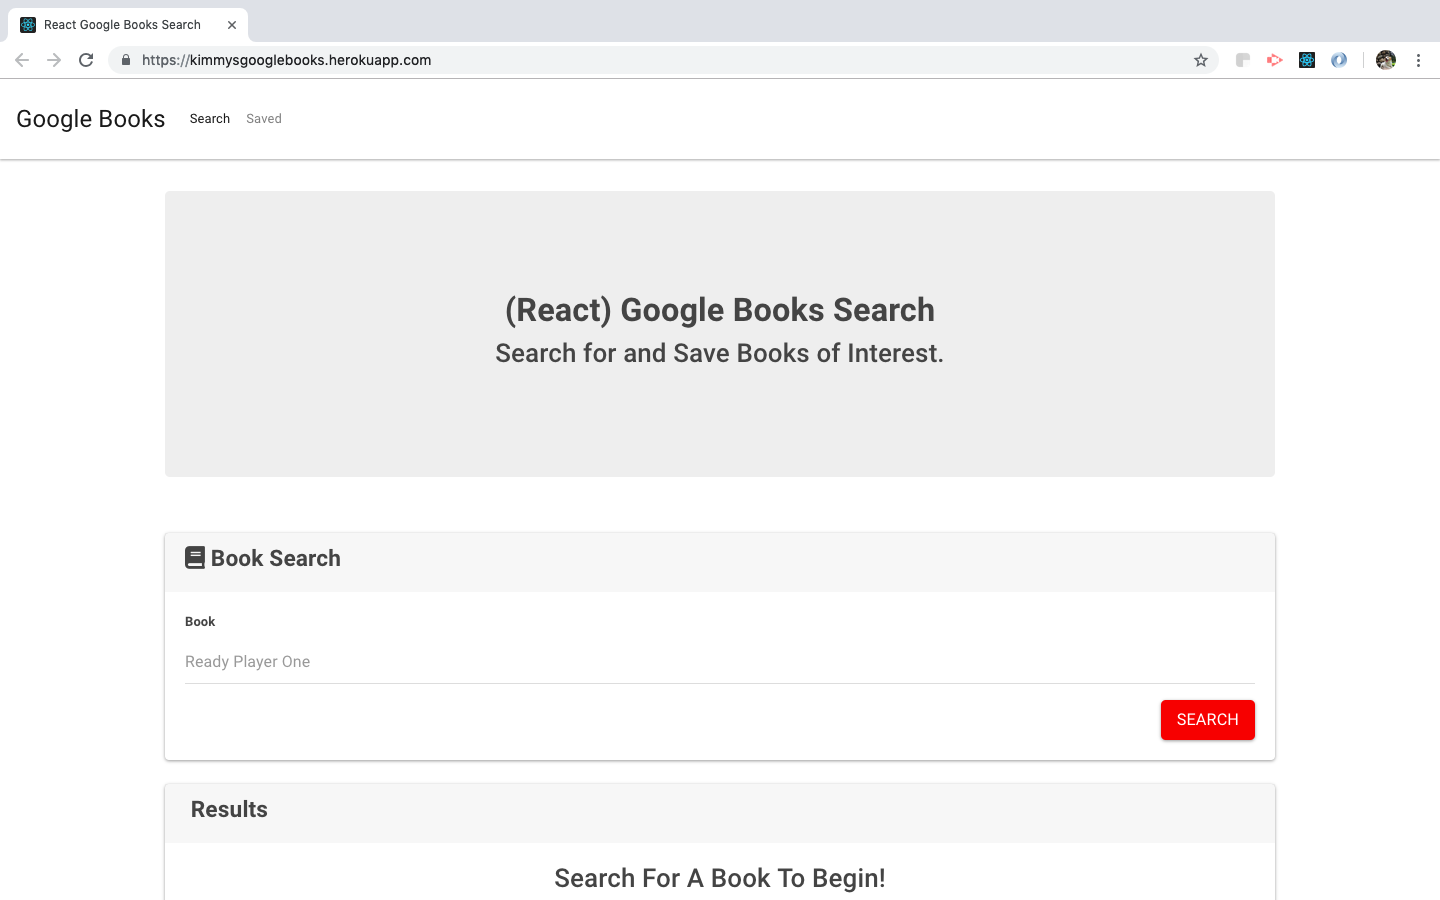 Google booksearch with React